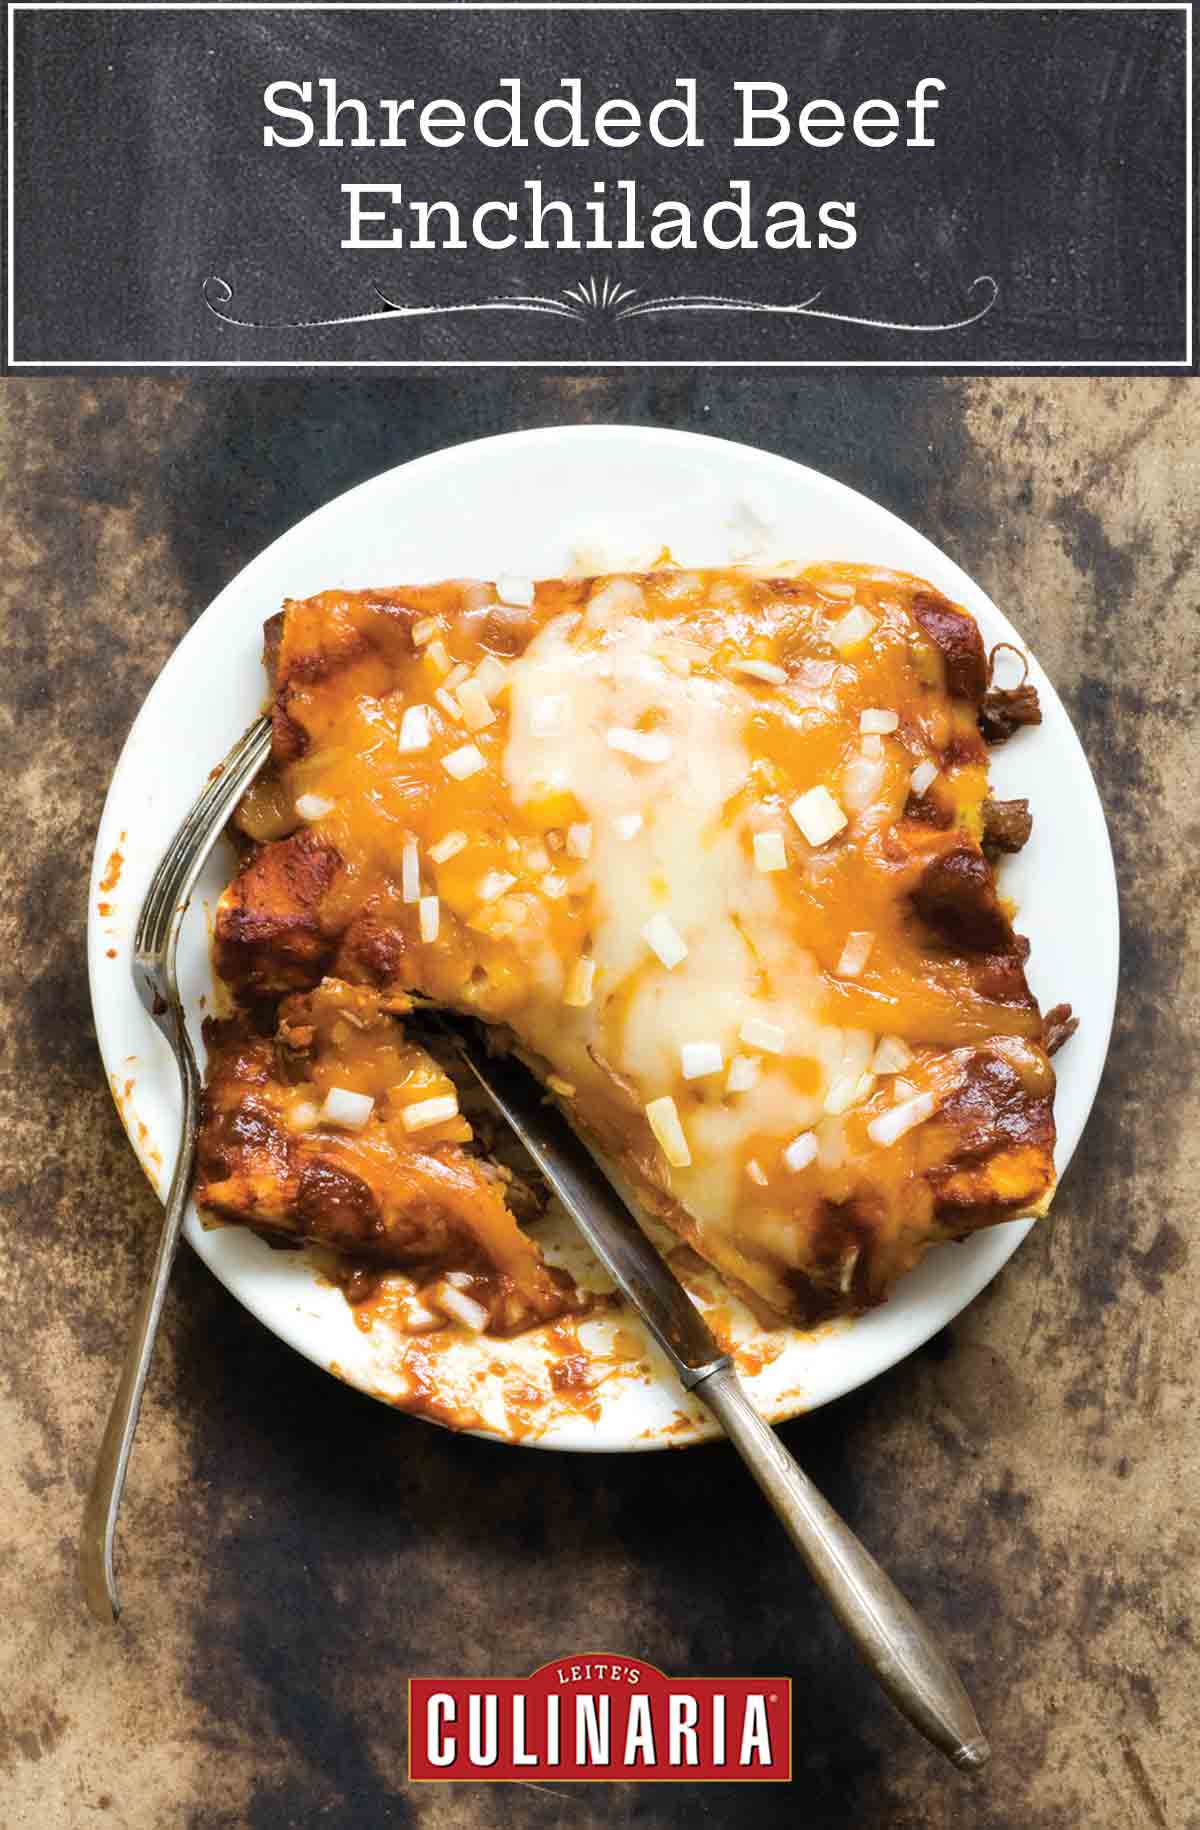 A white plate with 3 shredded beef enchiladas covered with melted cheese and diced onions, with a knife and fork.